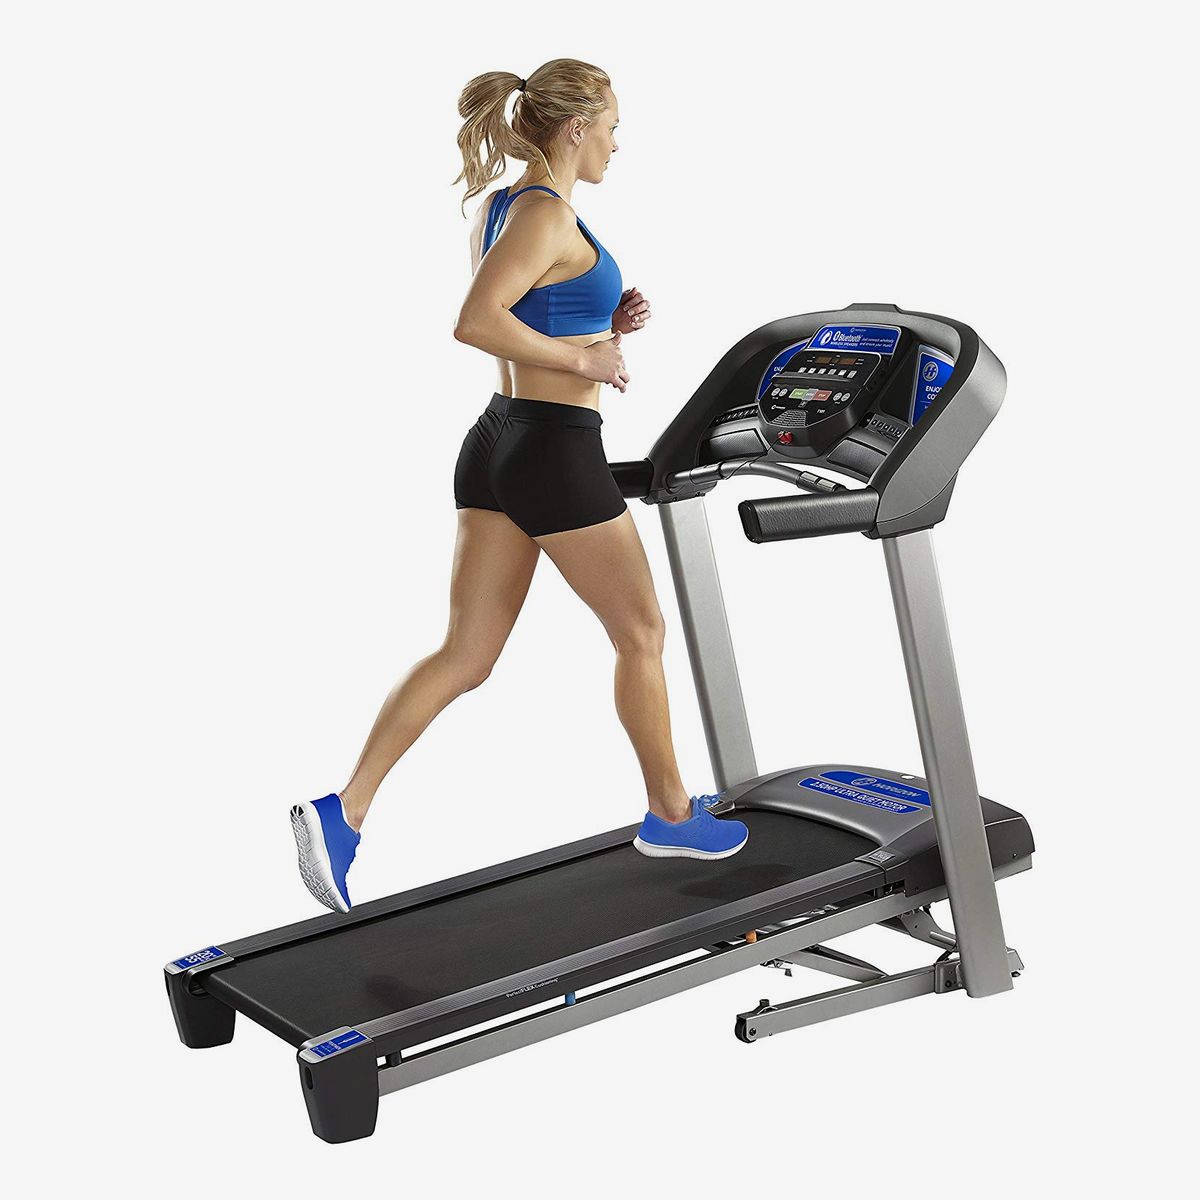 looking for a treadmill